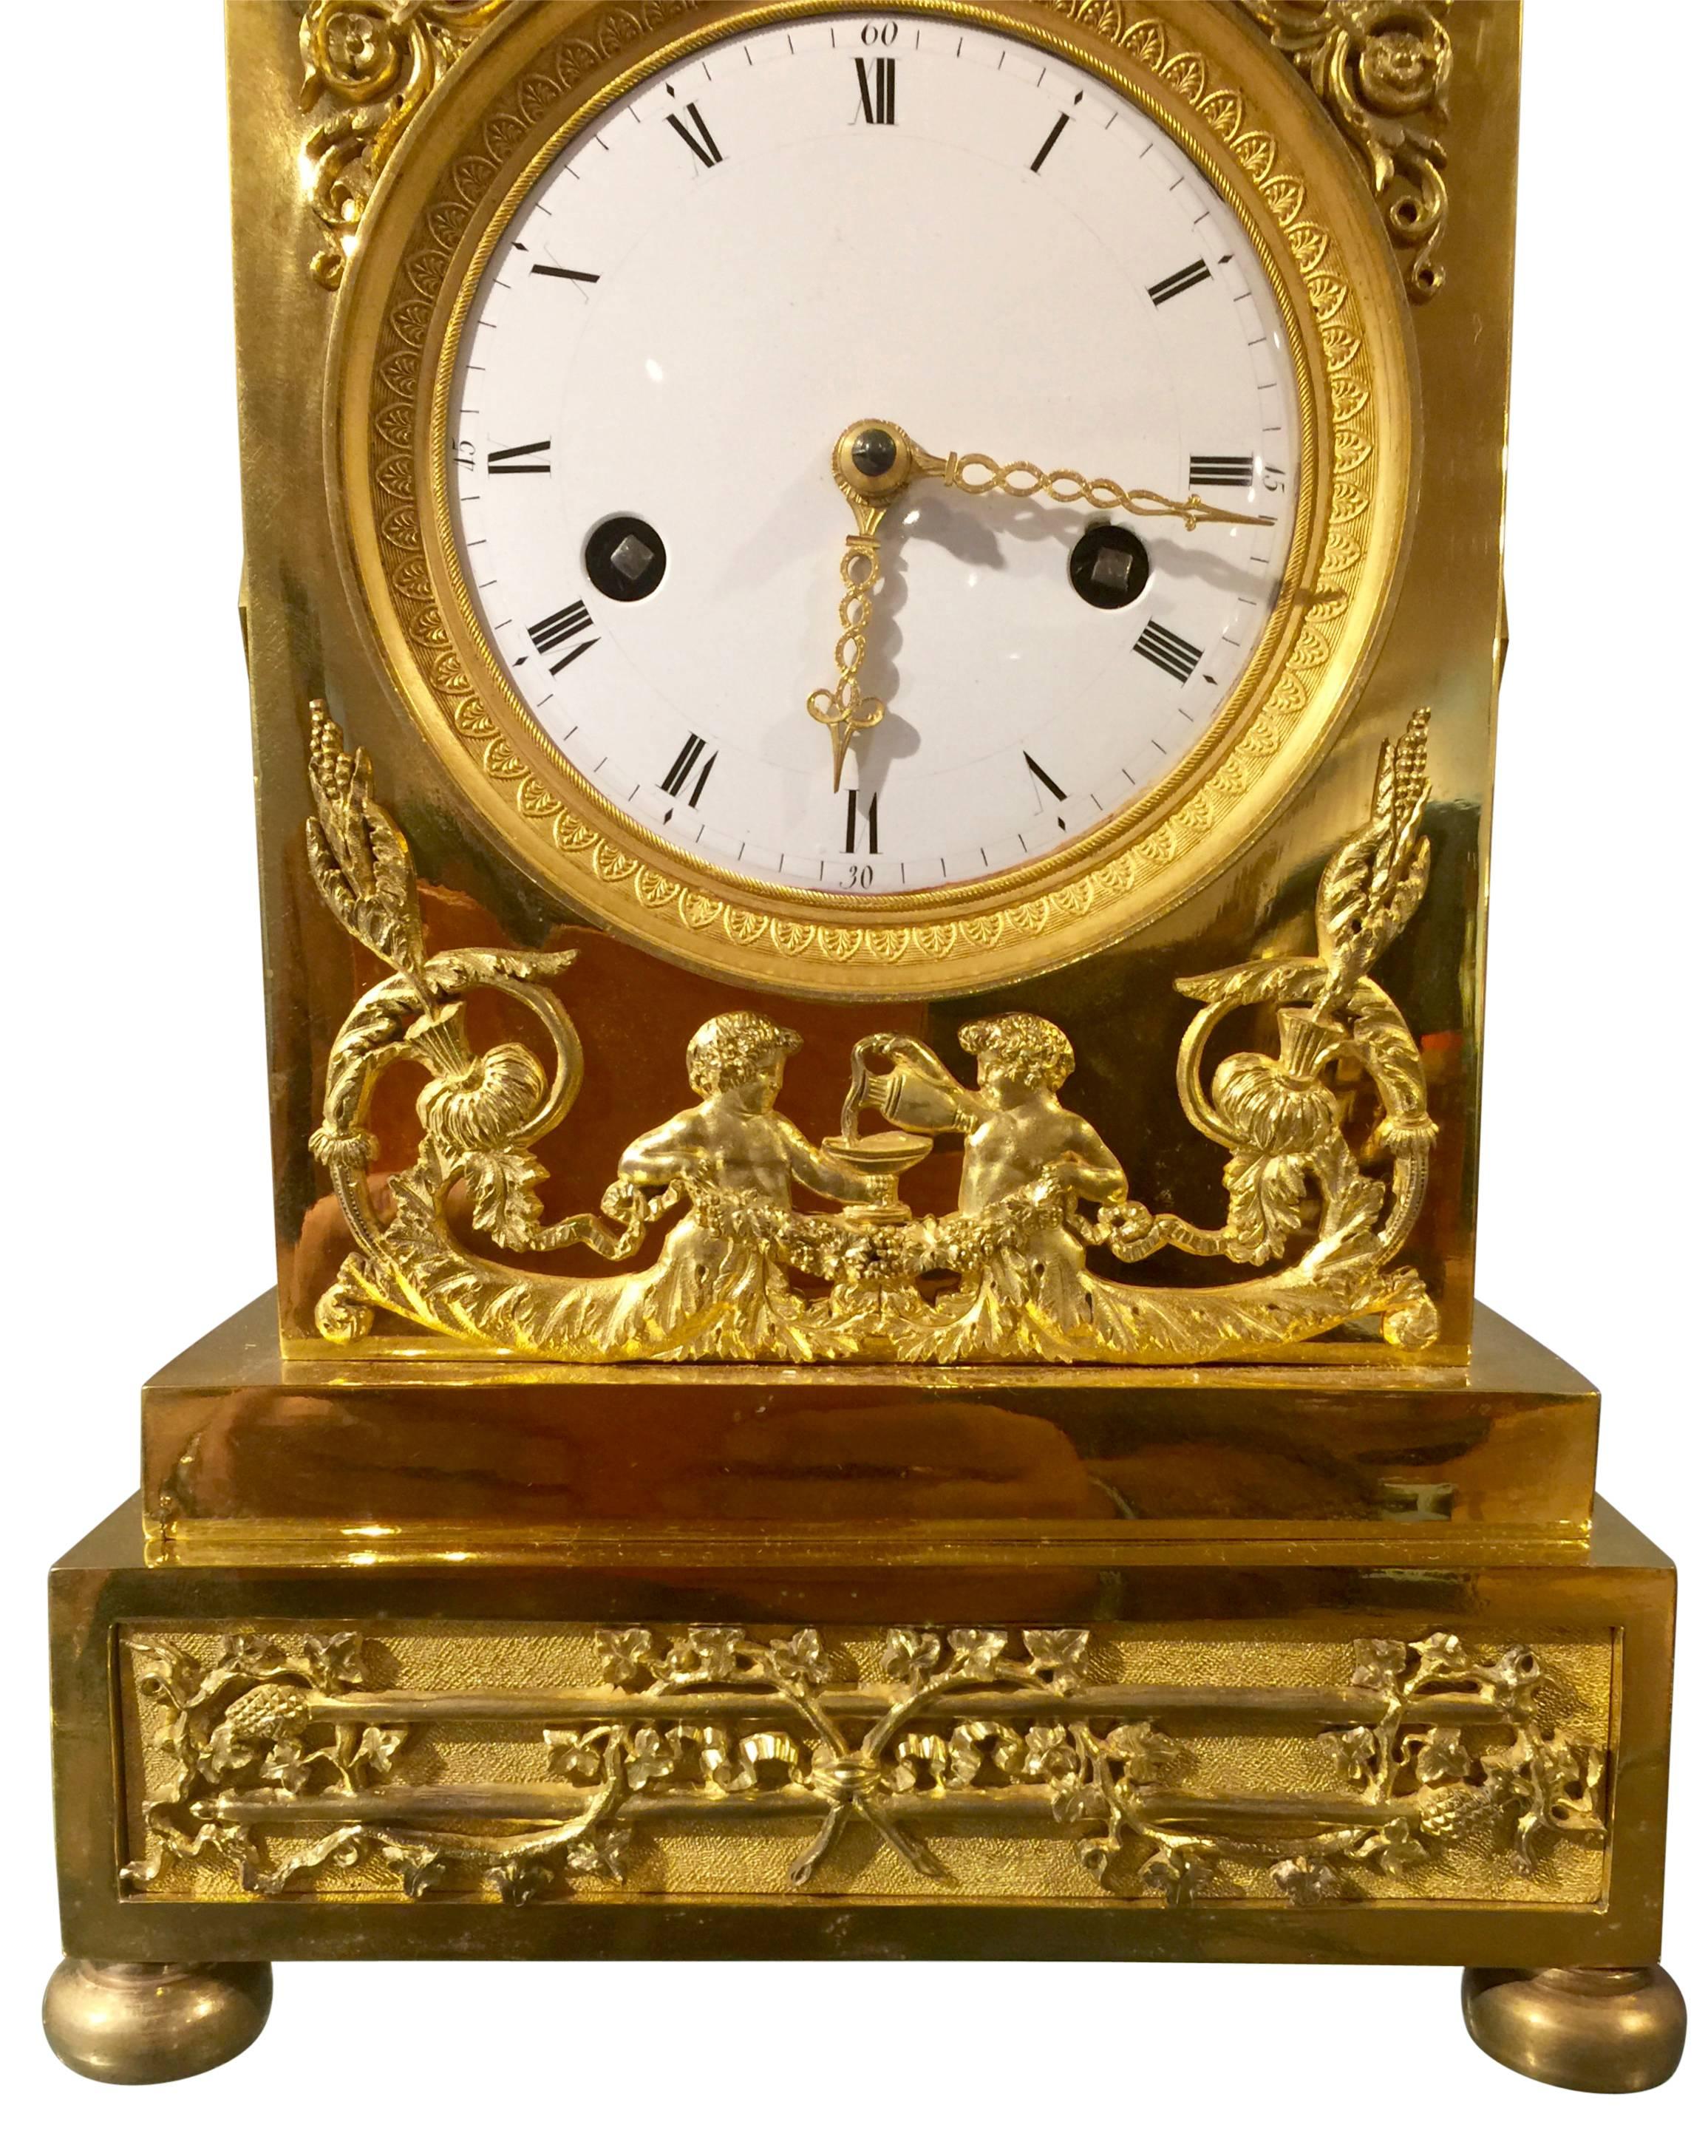 French mantel clock circa 1805, putti feeding lioness with grapes.
Bronze gilt eight day movement, half-hour strike on bell, pendulum to wire suspension.